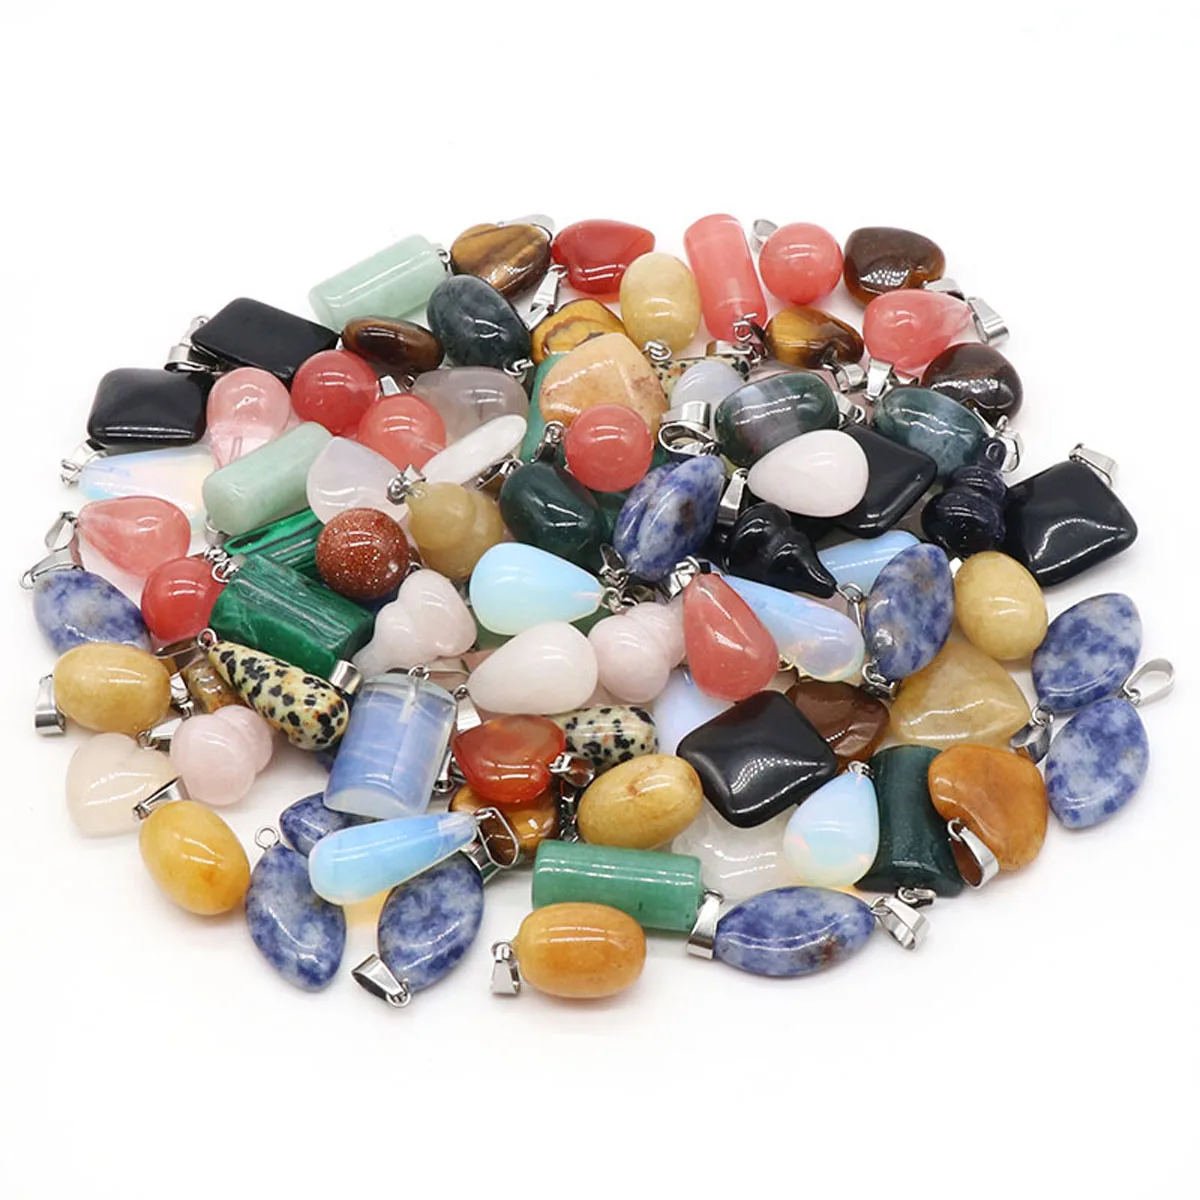 

Natural Stone Gemstone Pendant Blind Box Random Shipment Exquisite Charm for Jewelry Making DIY Necklace Bracelet Accessories